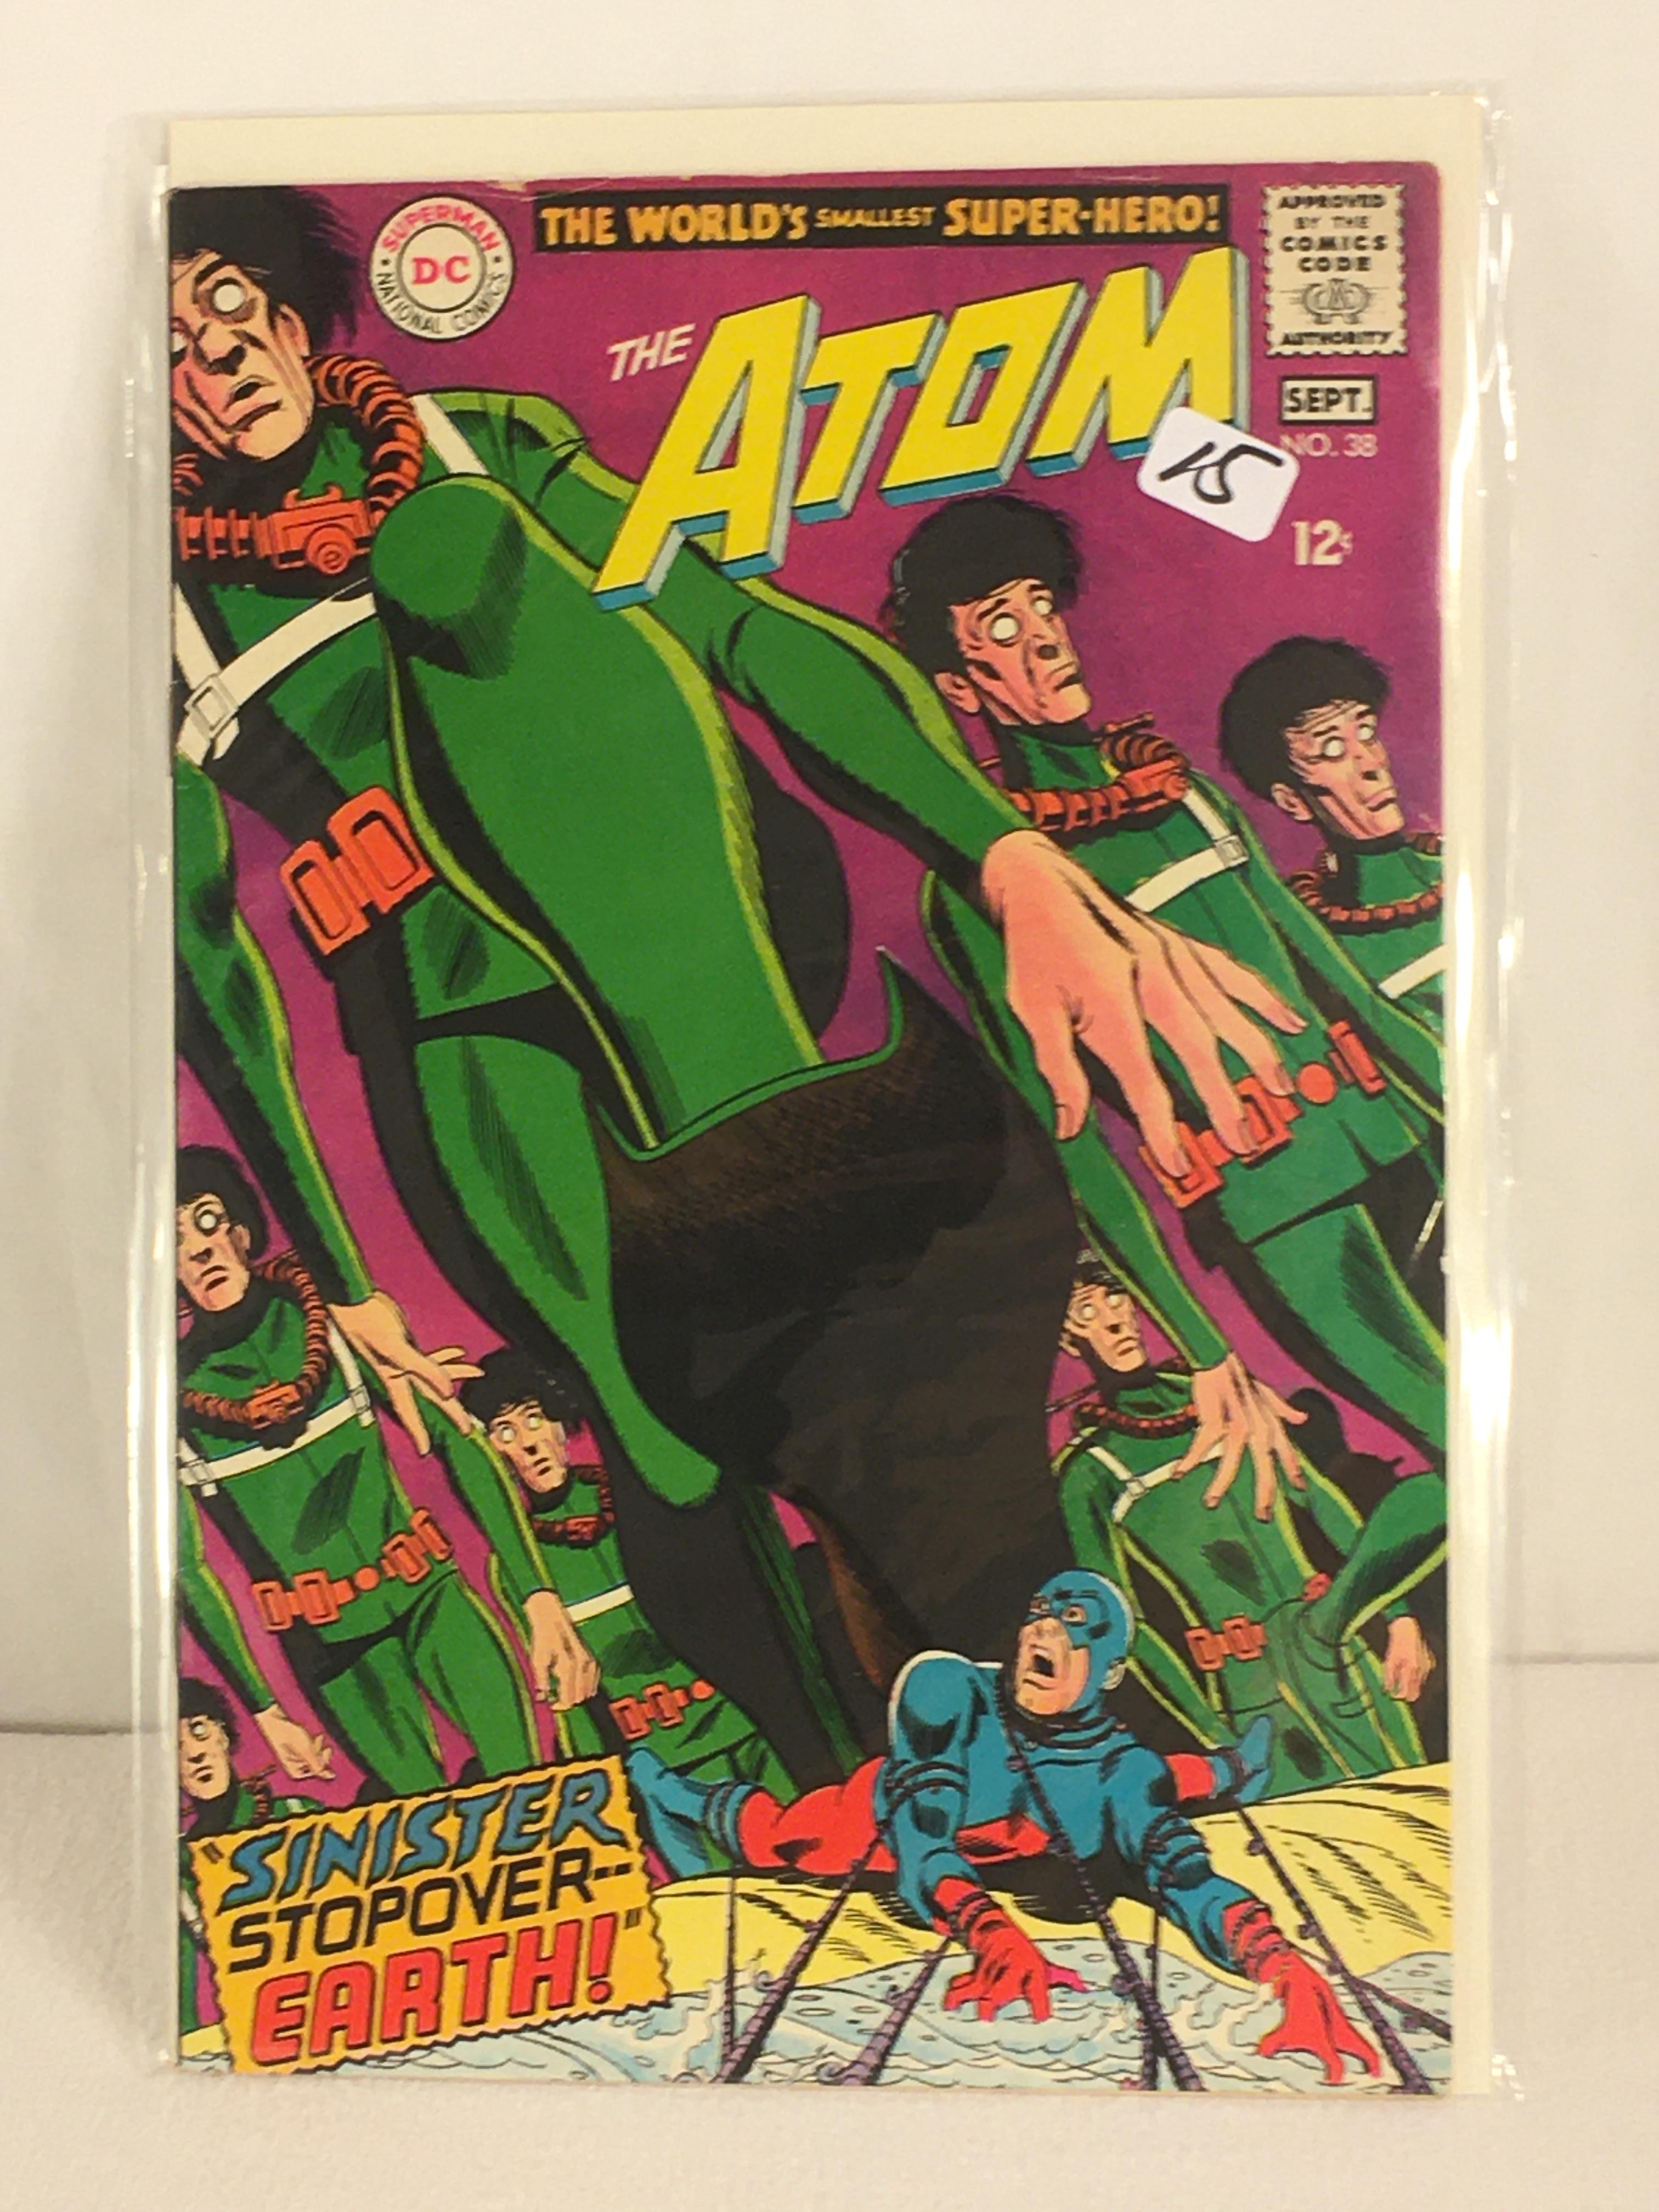 Collector Vintage DC, Comics The ATOM Sinister Stopover Earth Comic Book No.38